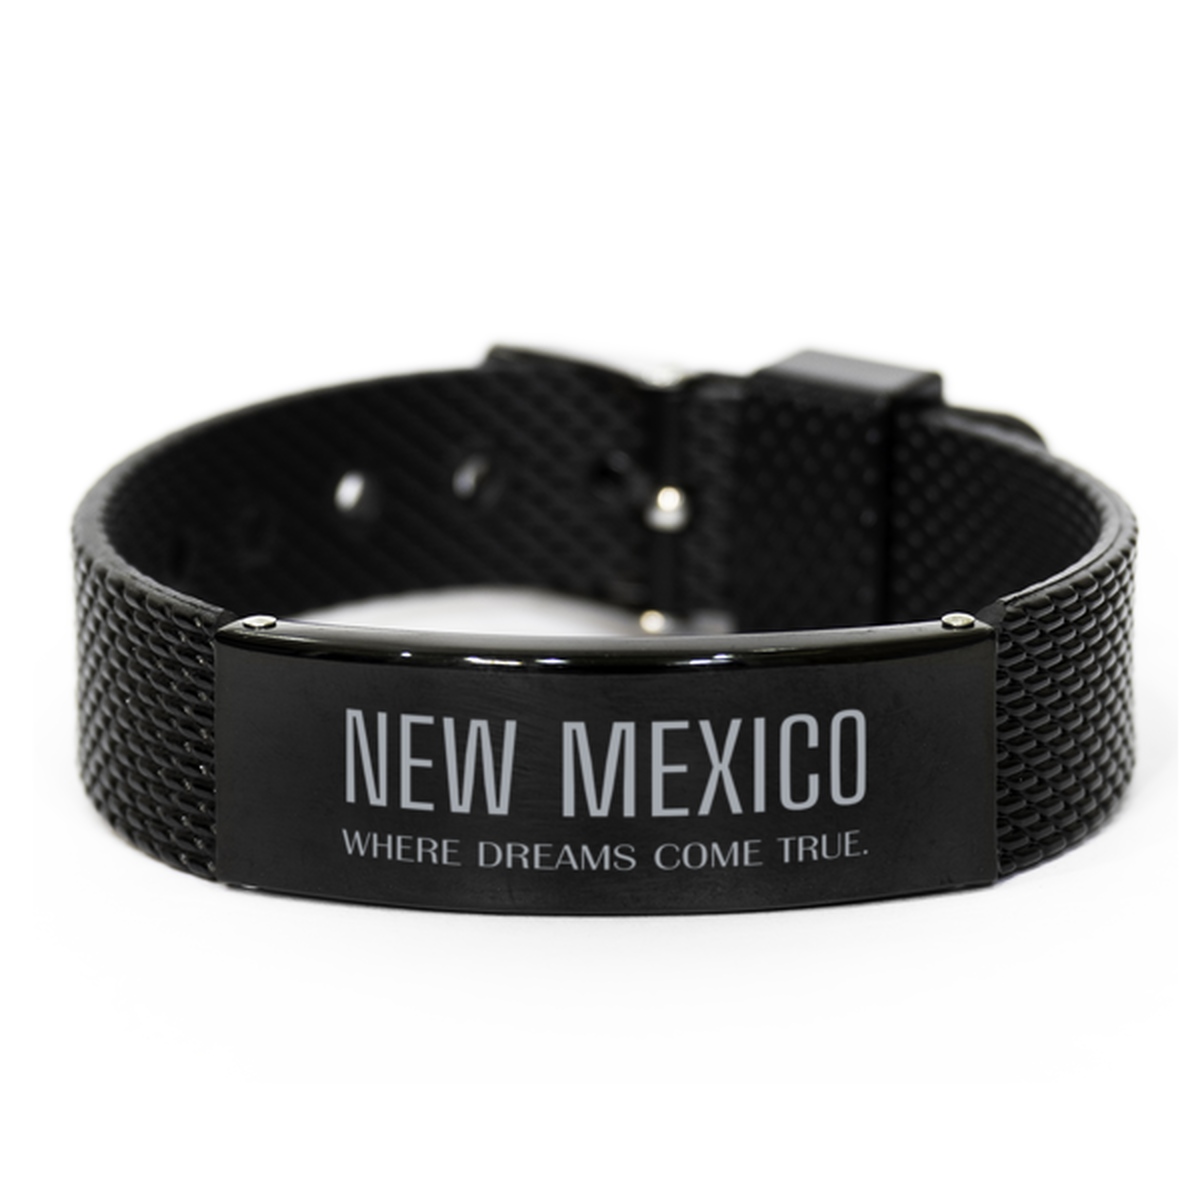 Love New Mexico State Black Shark Mesh Bracelet, New Mexico Where dreams come true, Birthday Inspirational Gifts For New Mexico Men, Women, Friends